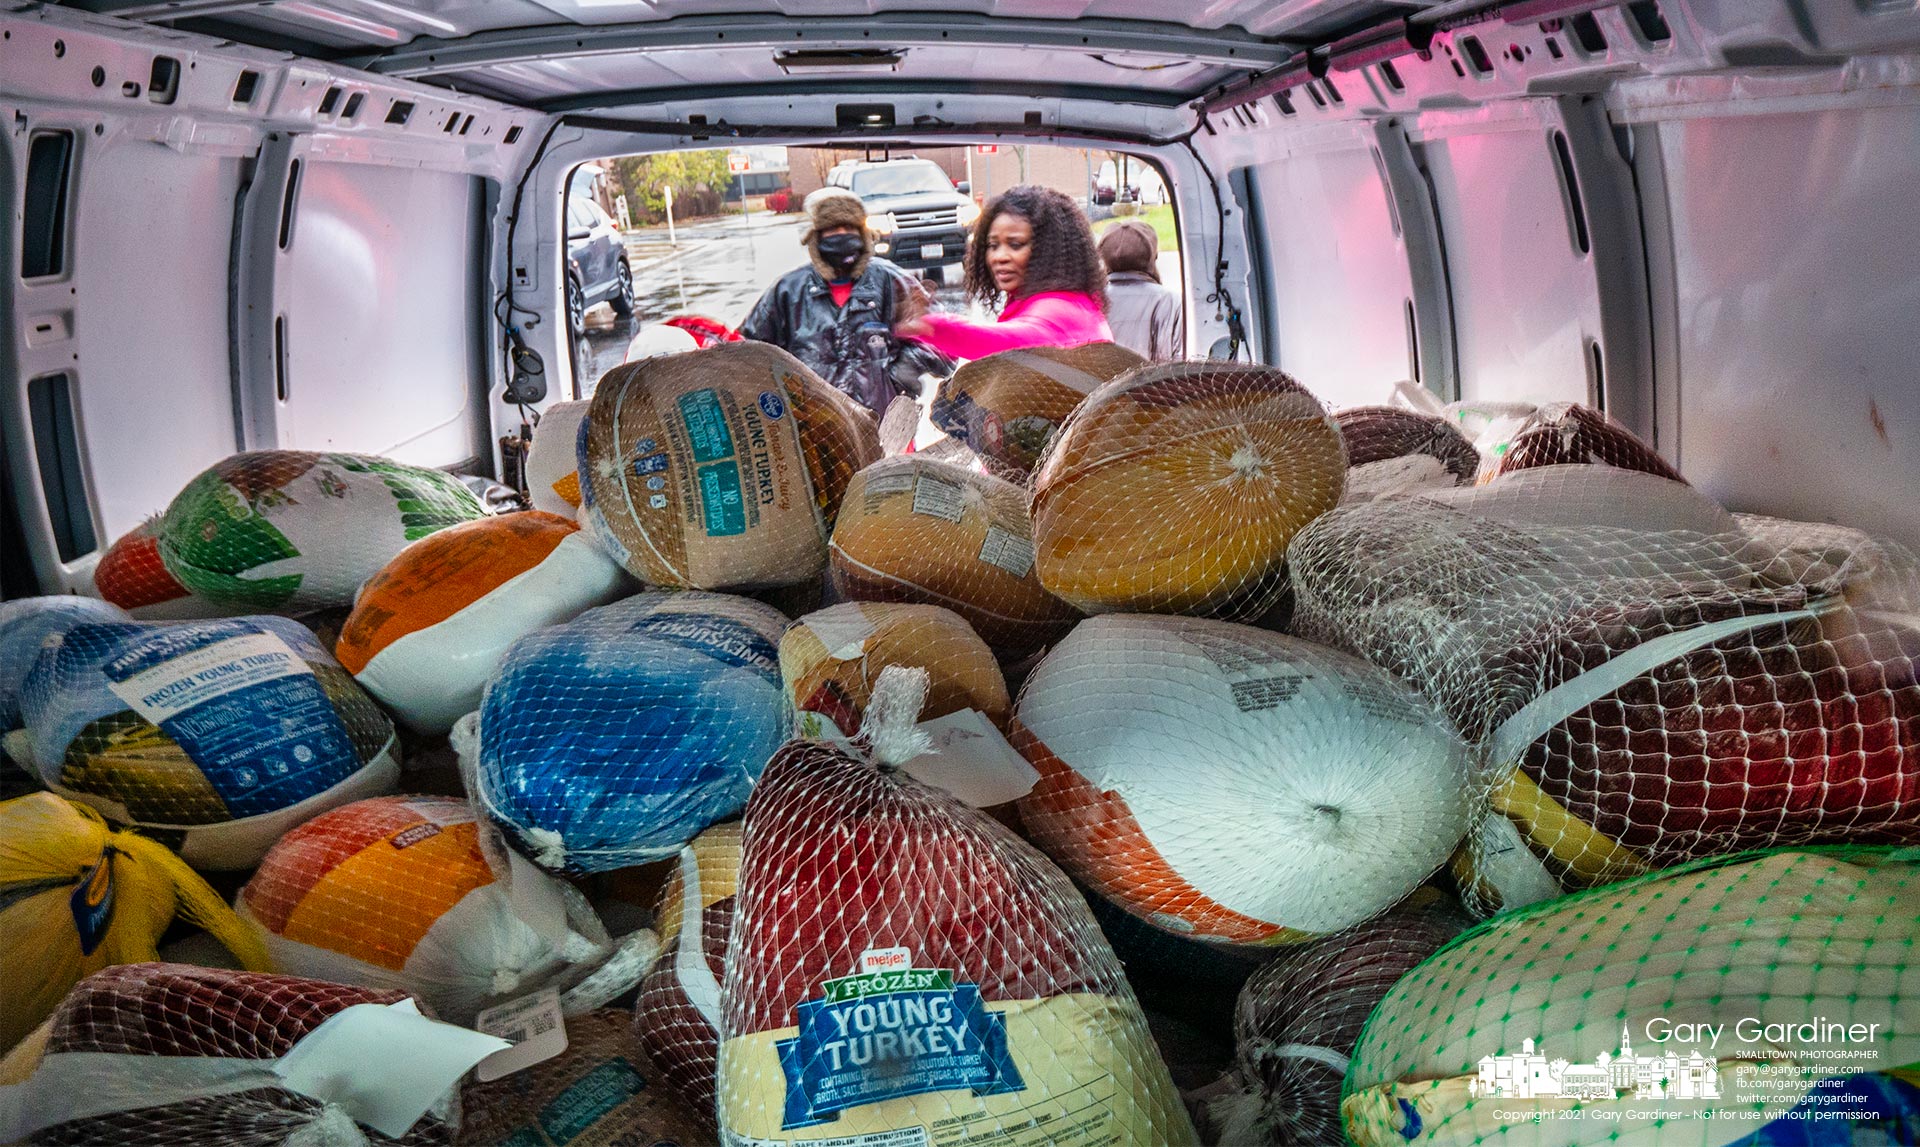 Volunteers toss frozen turkeys into a utility van as St. Paul The Apostle church collects turkeys for its sister parish in Columbus, Holy Rosary-St. John. My Final Photo for Nov. 21, 2021.